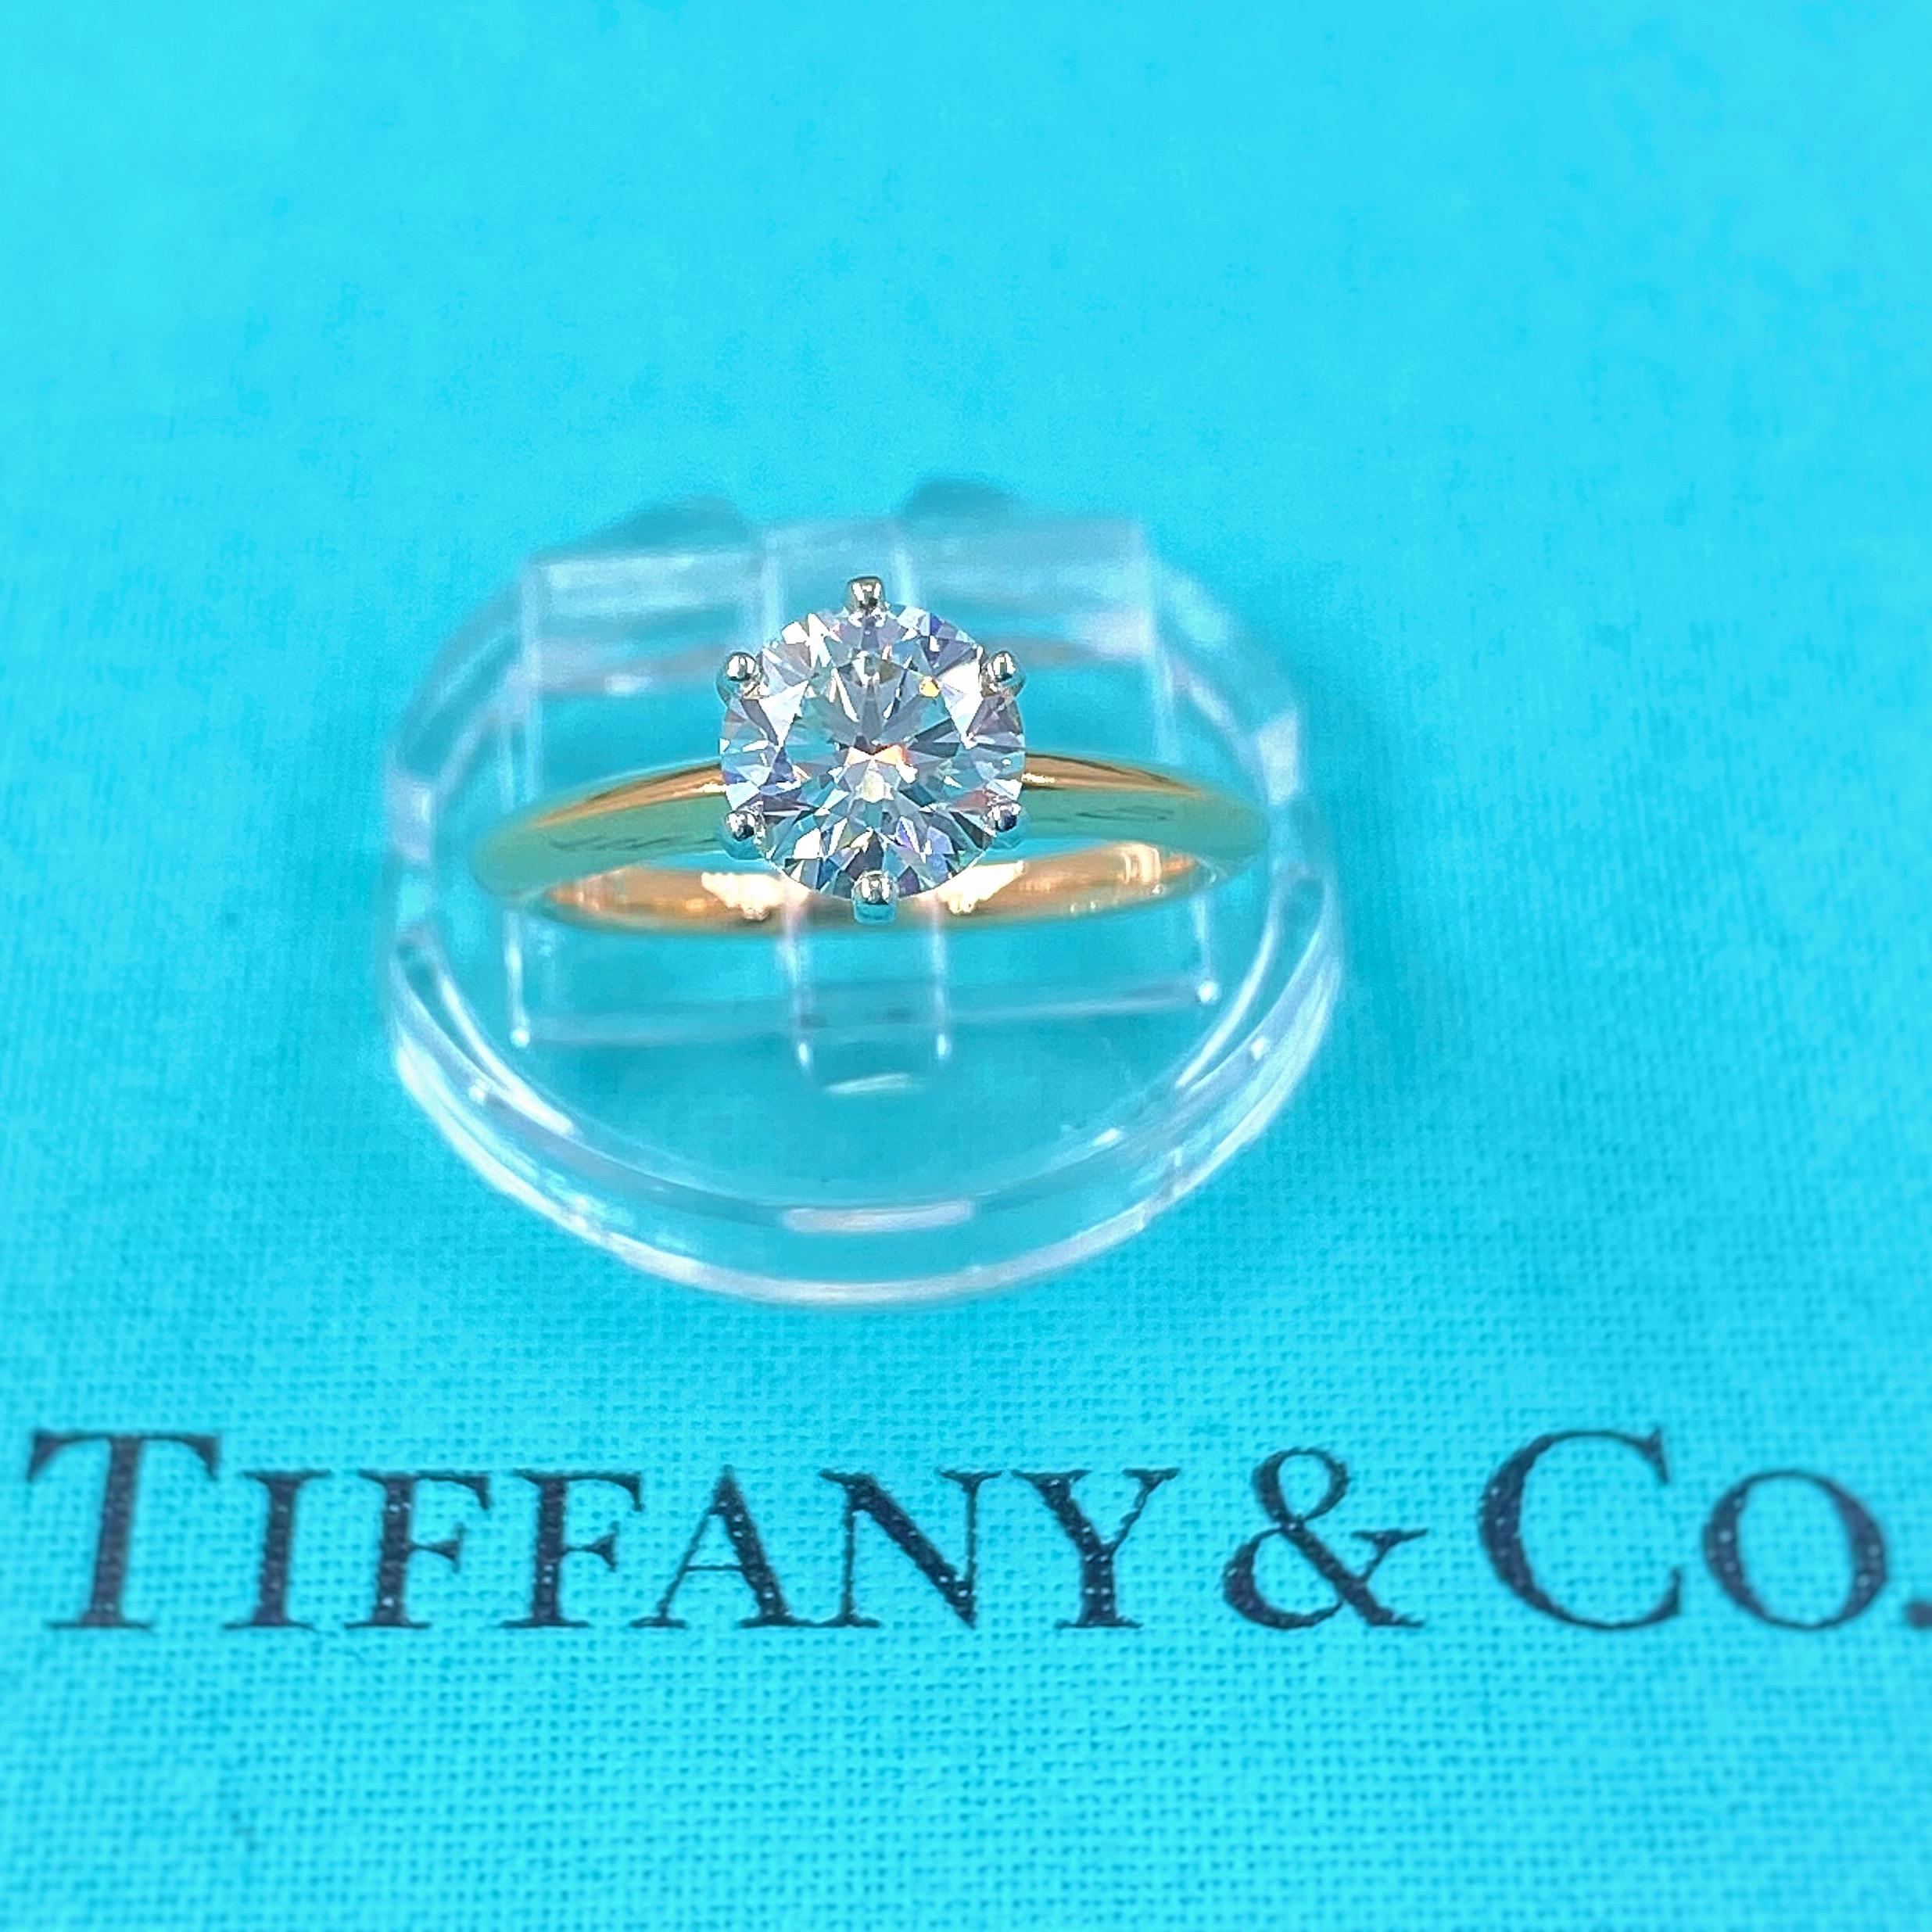 Tiffany & Co. Solitaire Engagement Ring
Style:  Classic 6-Prong Solitaire
Ref. number:  67205537 / T12040159
Metal:  18kt Rose Gold & Platinum
Size:  6 - sizable
TCW:  1.18 tcw
Main Diamond:  Round Brilliant cut Diamond 
Color & Clarity:  H / VS1